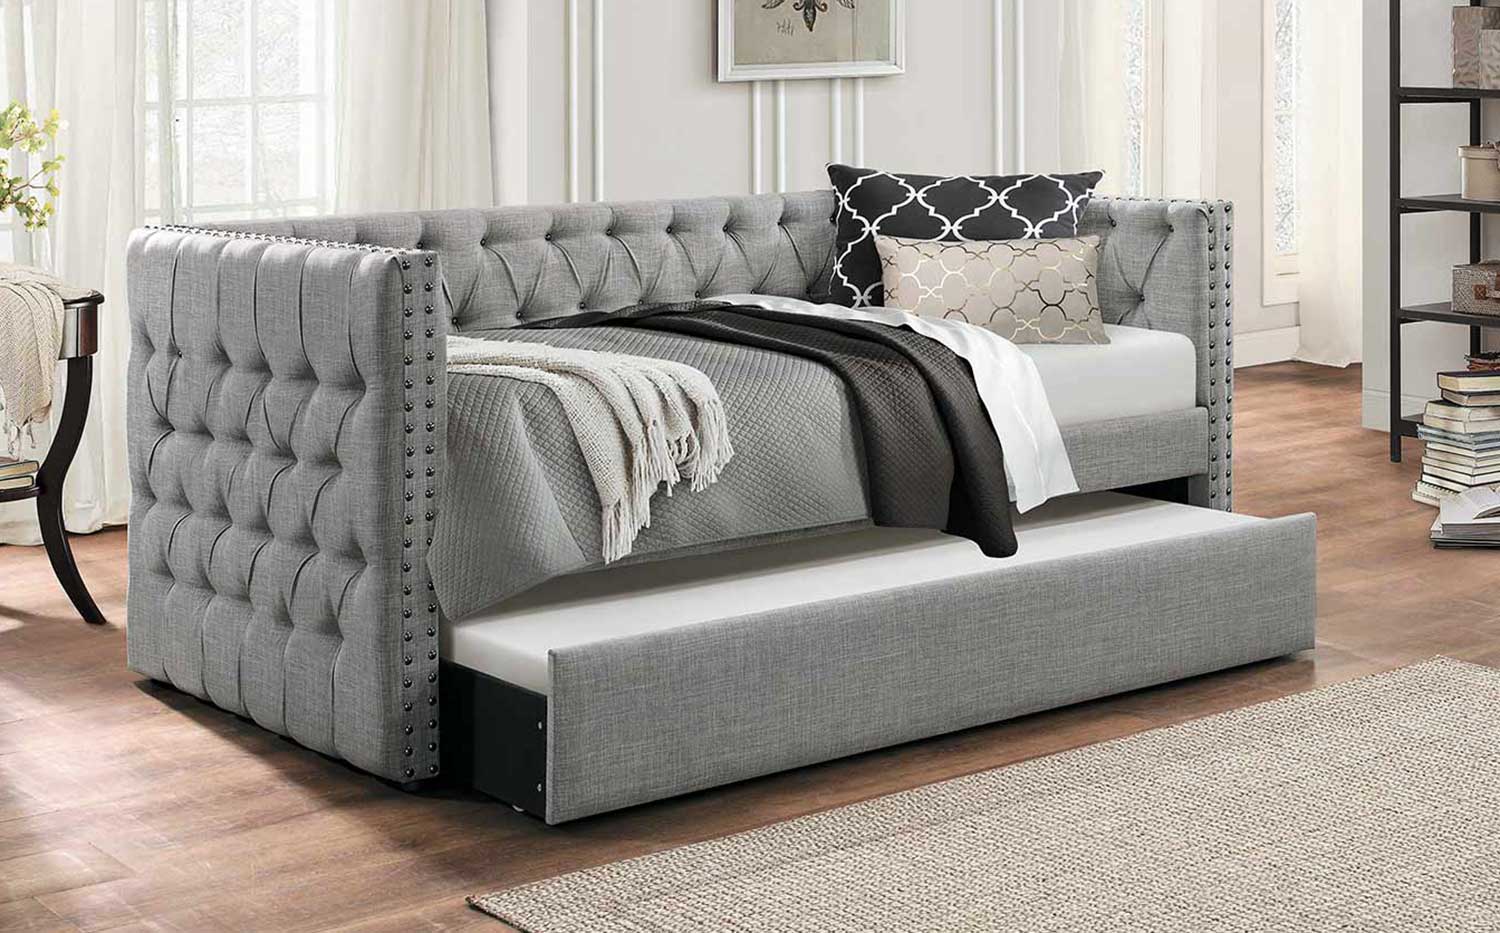 Homelegance Adalie Button Tufted Upholstered Daybed with Trundle - Gray